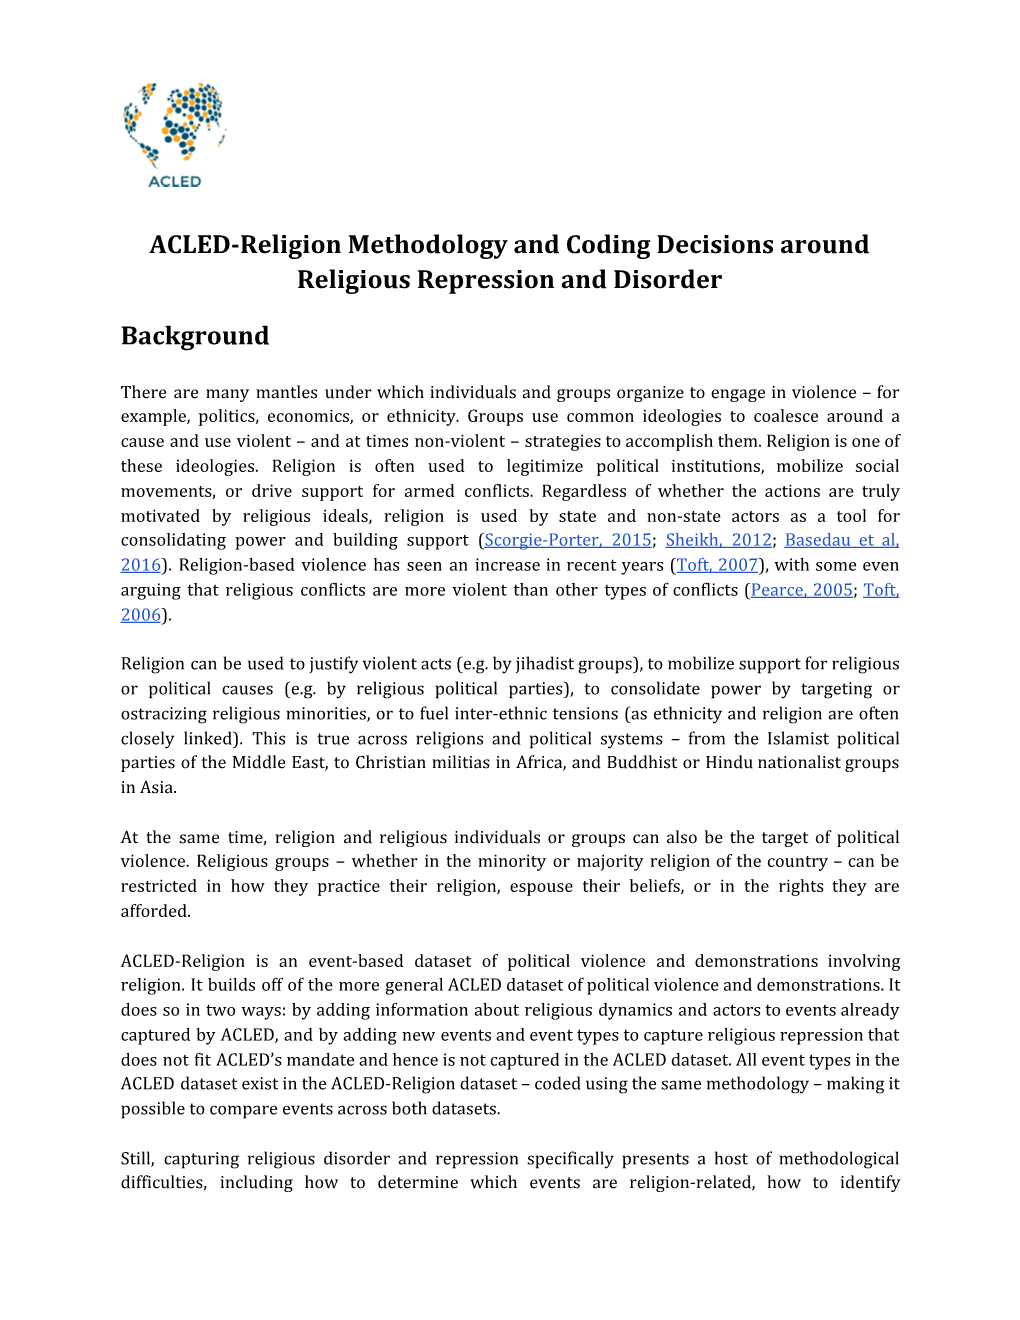 ACLED-Religion Methodology Brief